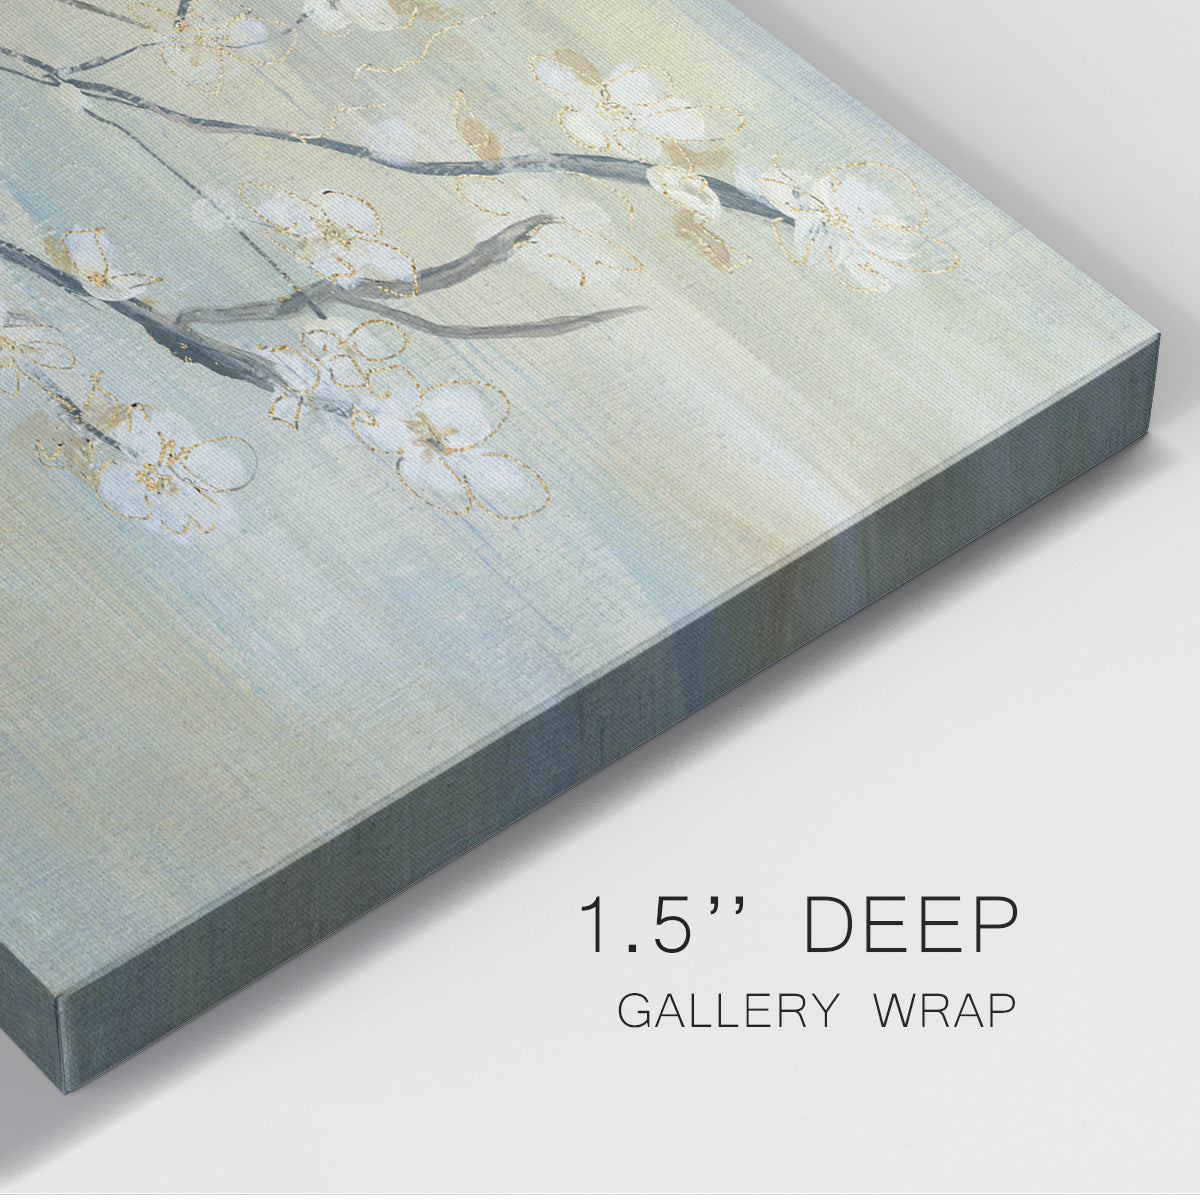 Blossoms & Spring Rain Premium Gallery Wrapped Canvas - Ready to Hang